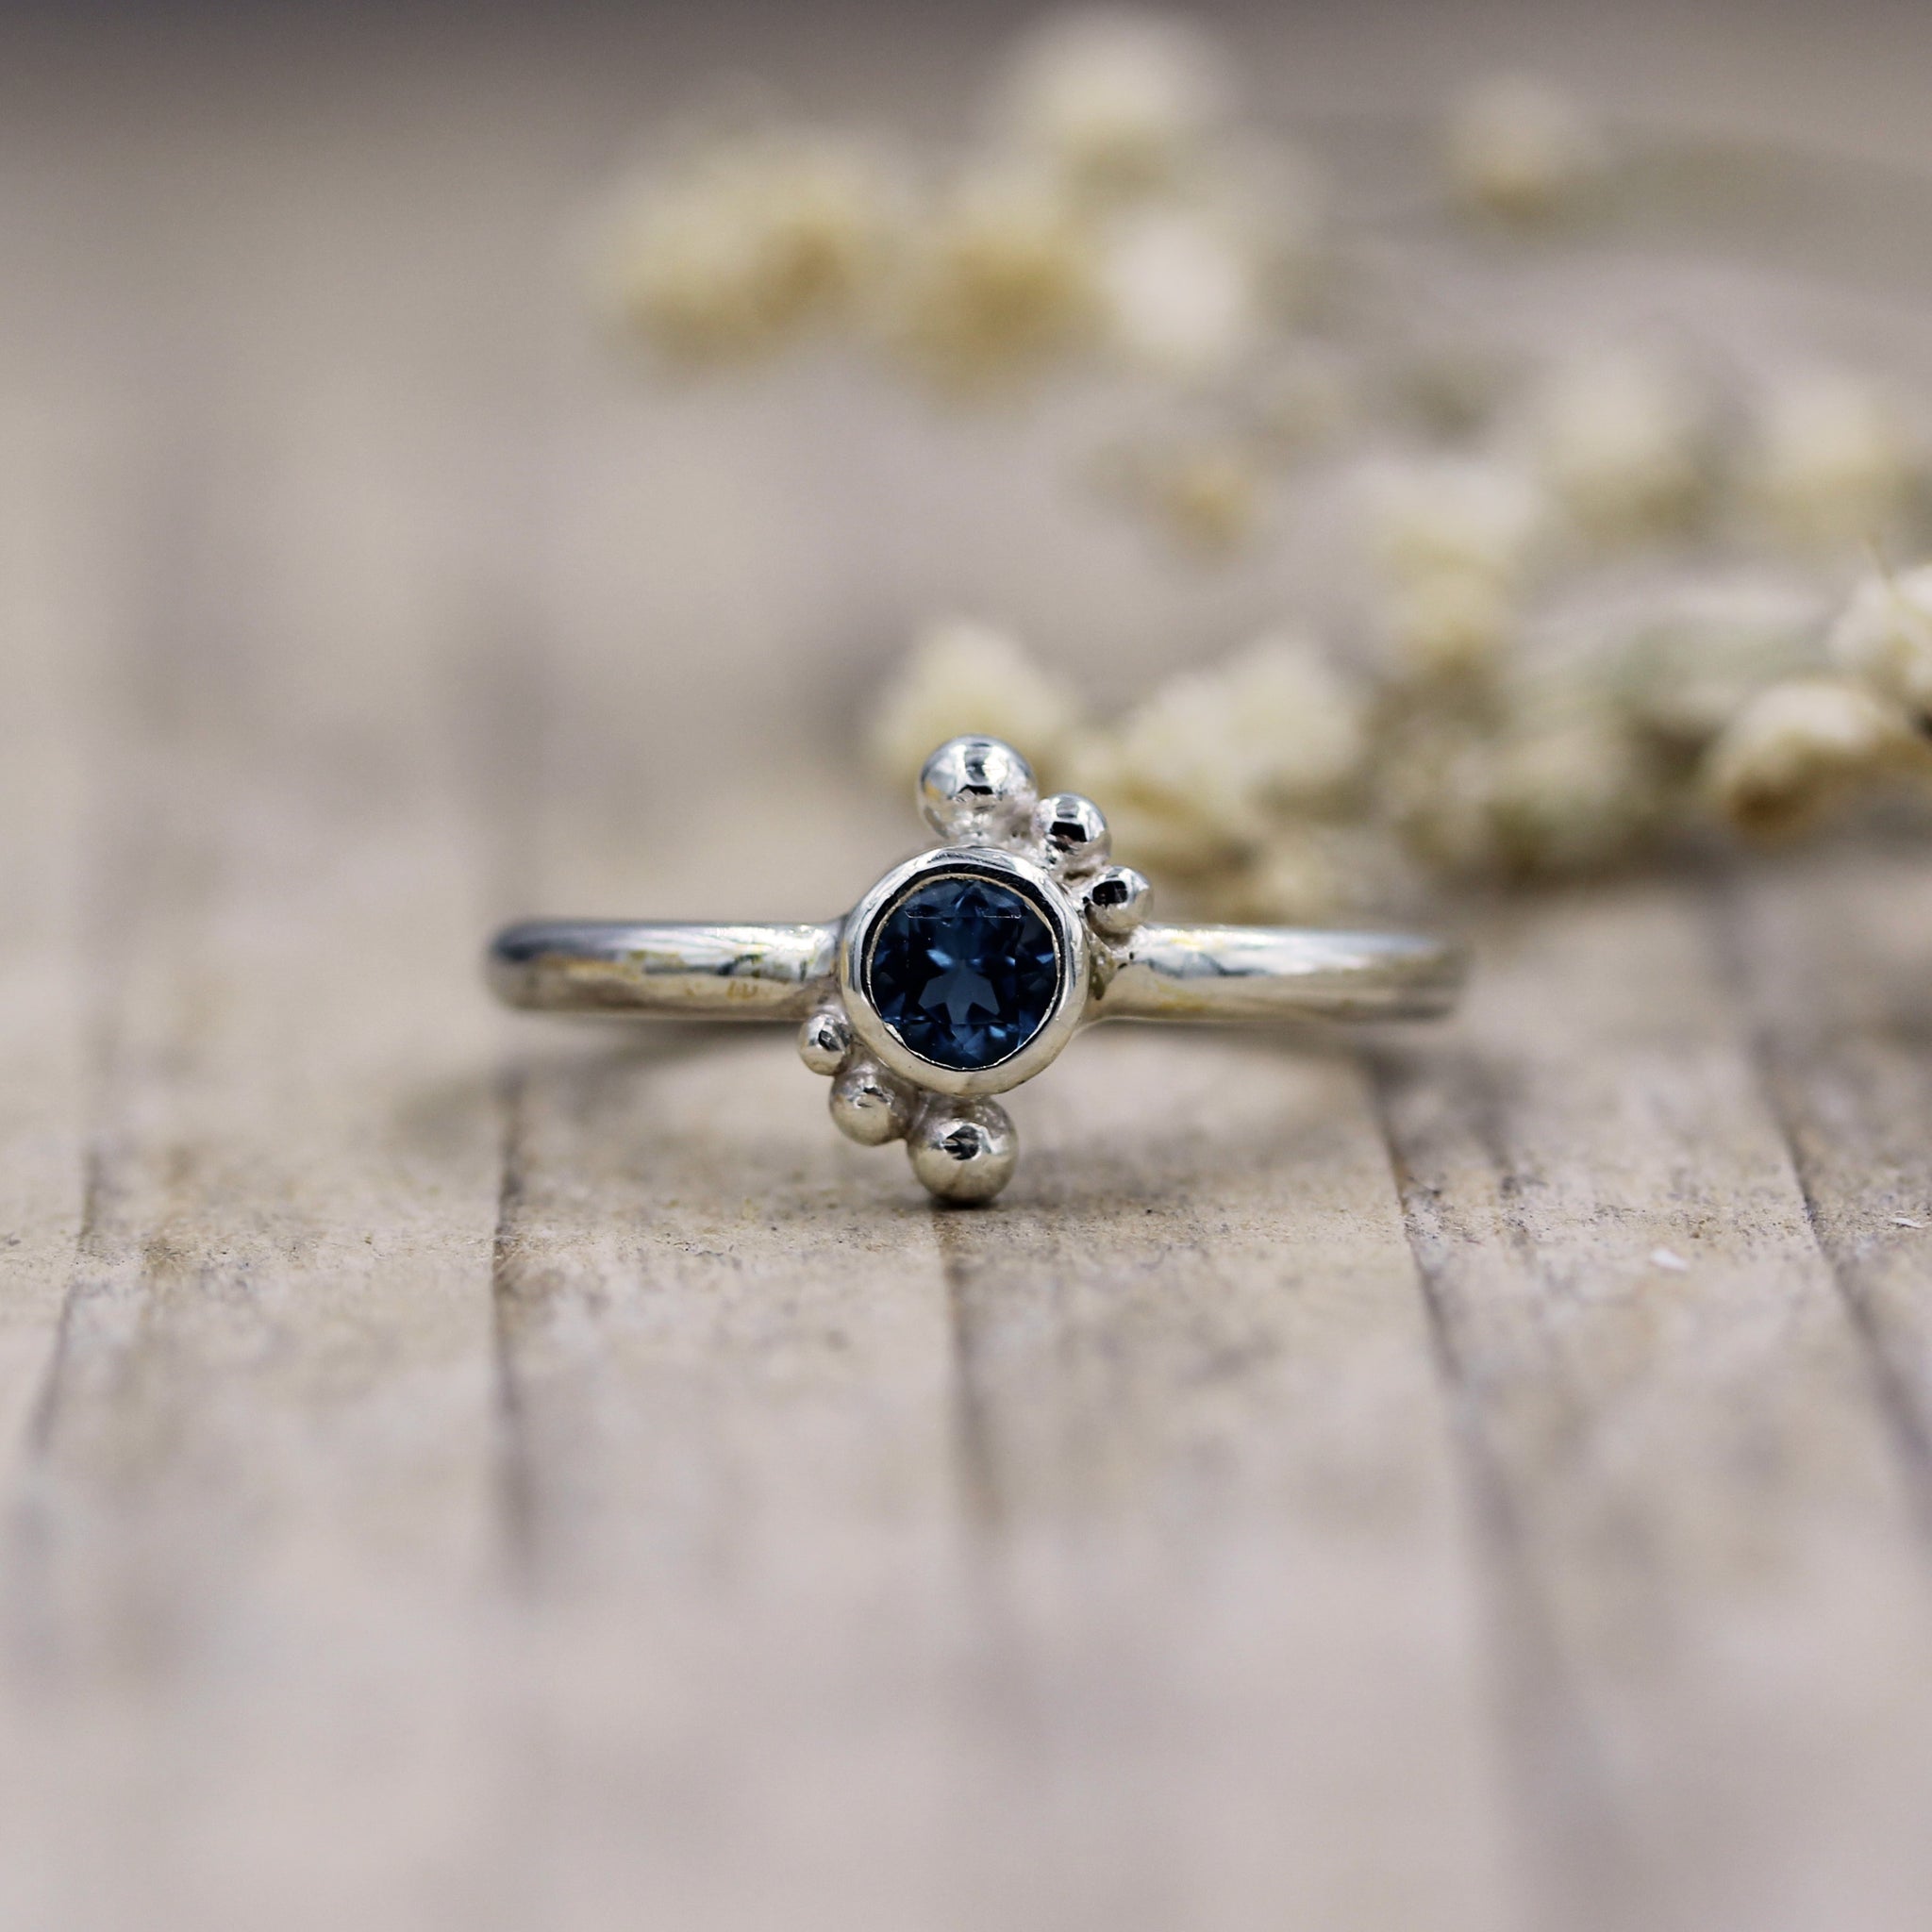 Sea inspired ring, handmade with 100% recycled silver and London Blue Topaz